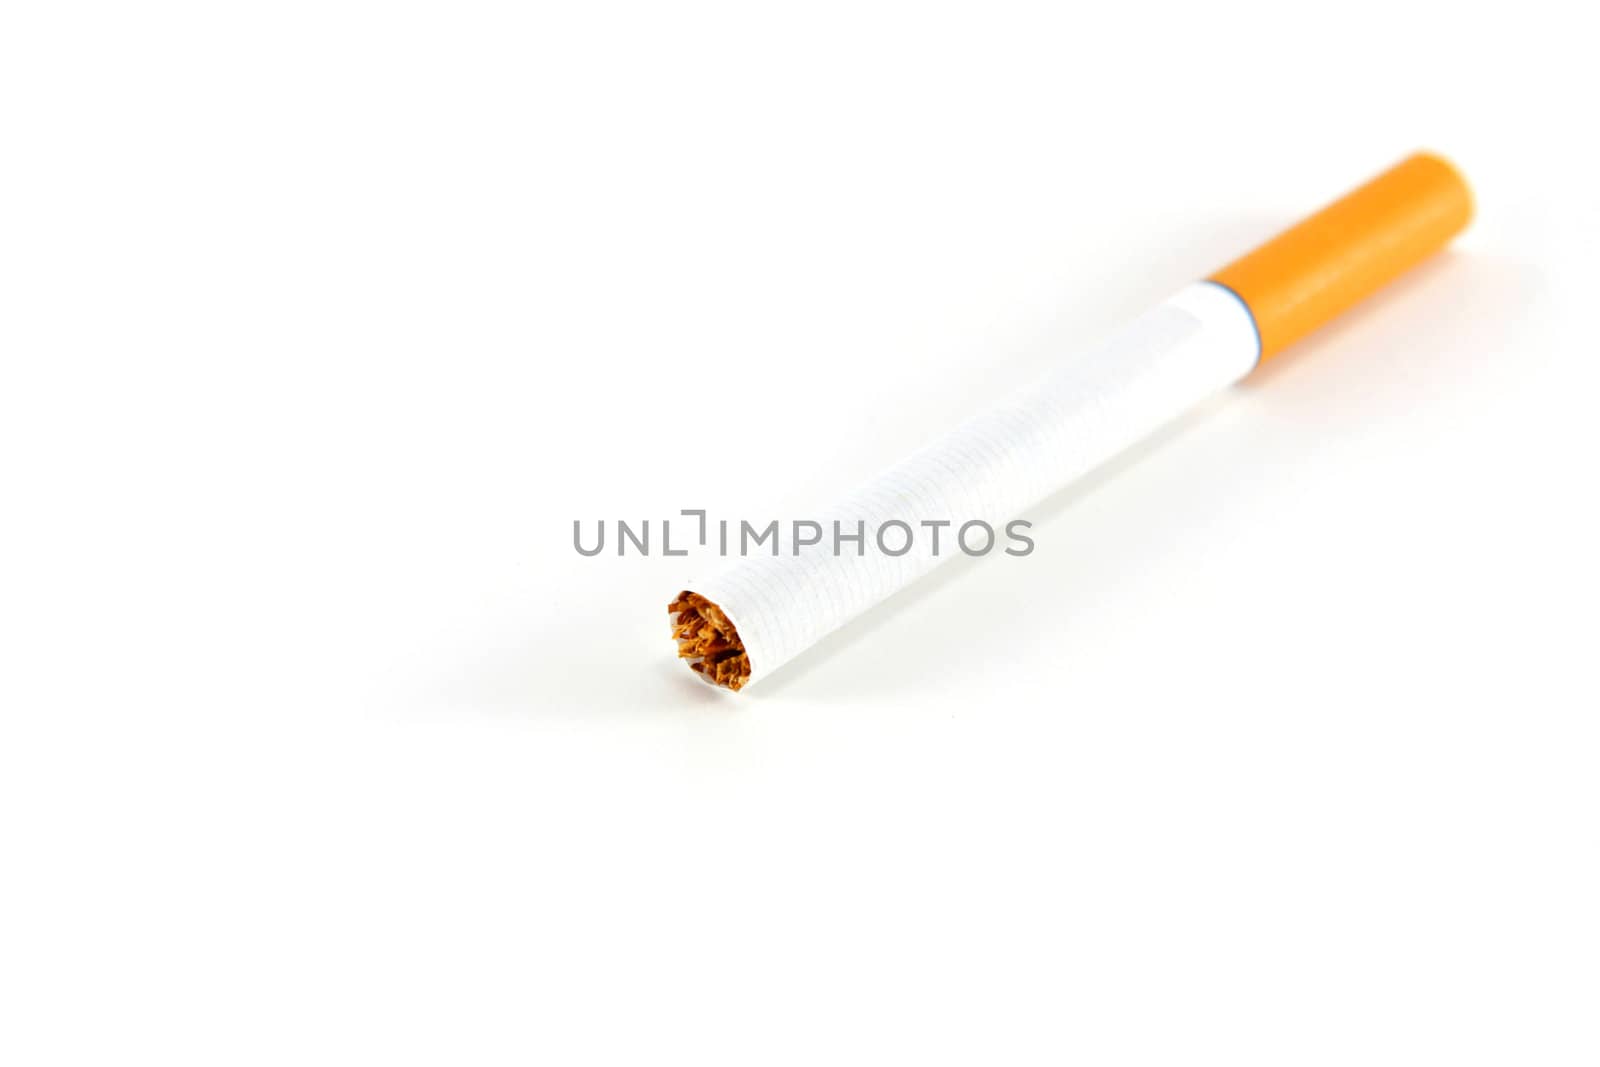 A single unlit cigarette isolated on white by ChrisAlleaume